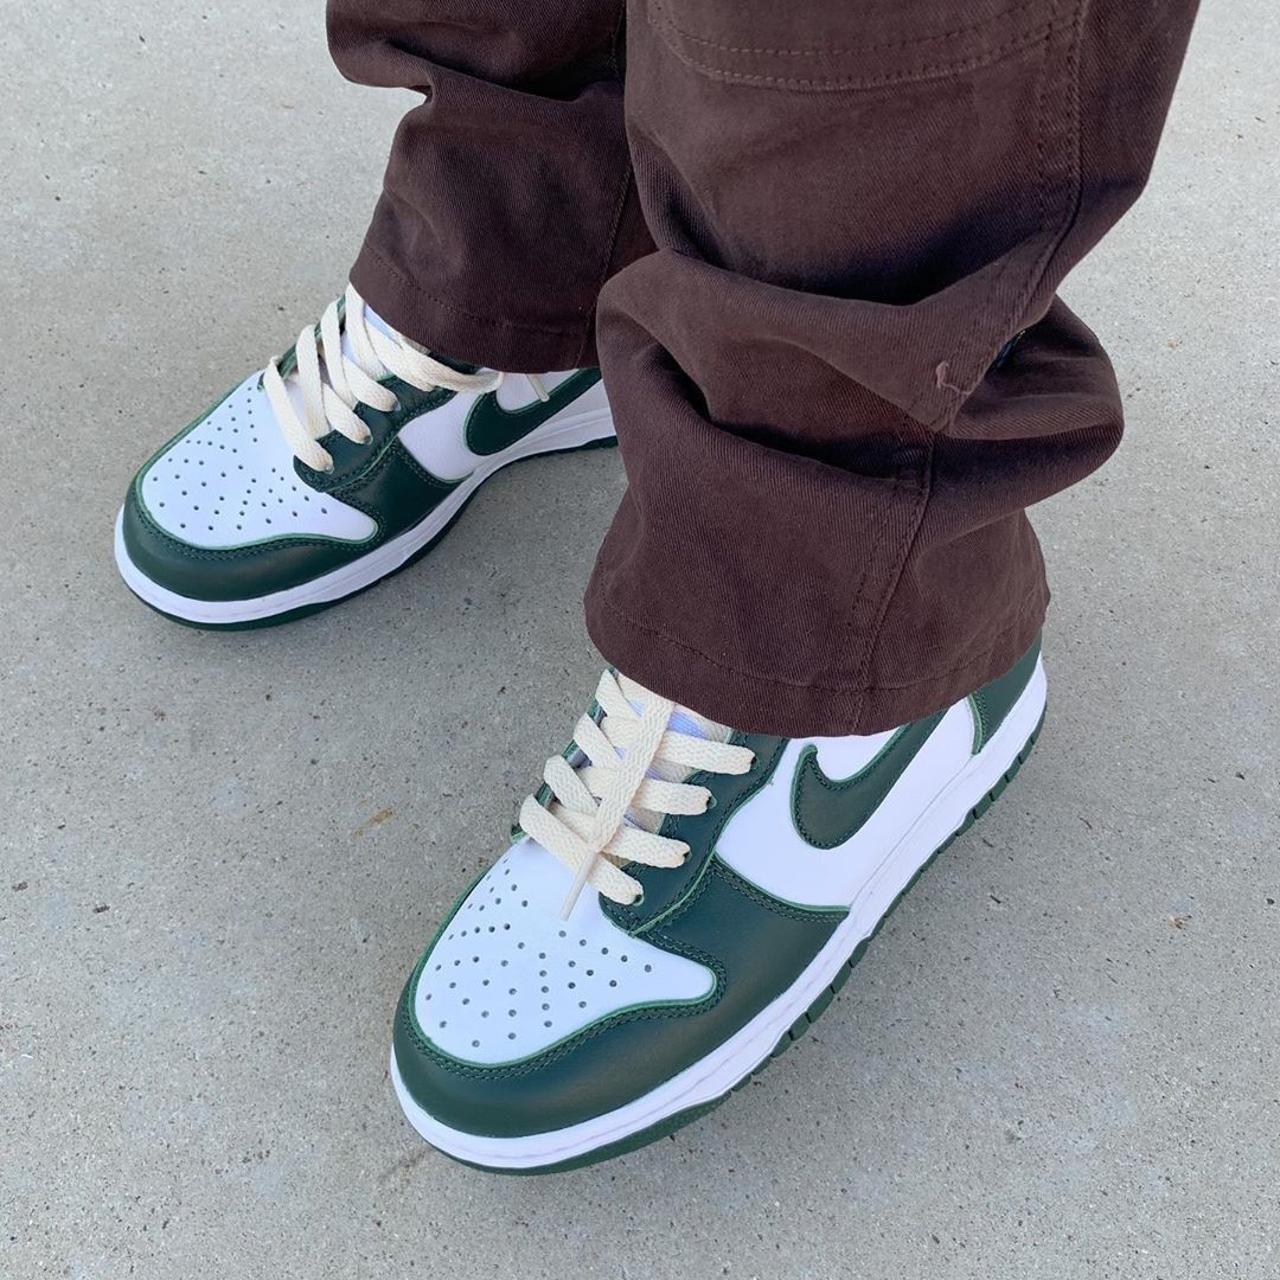 Nike Men's Green and White Trainers | Depop